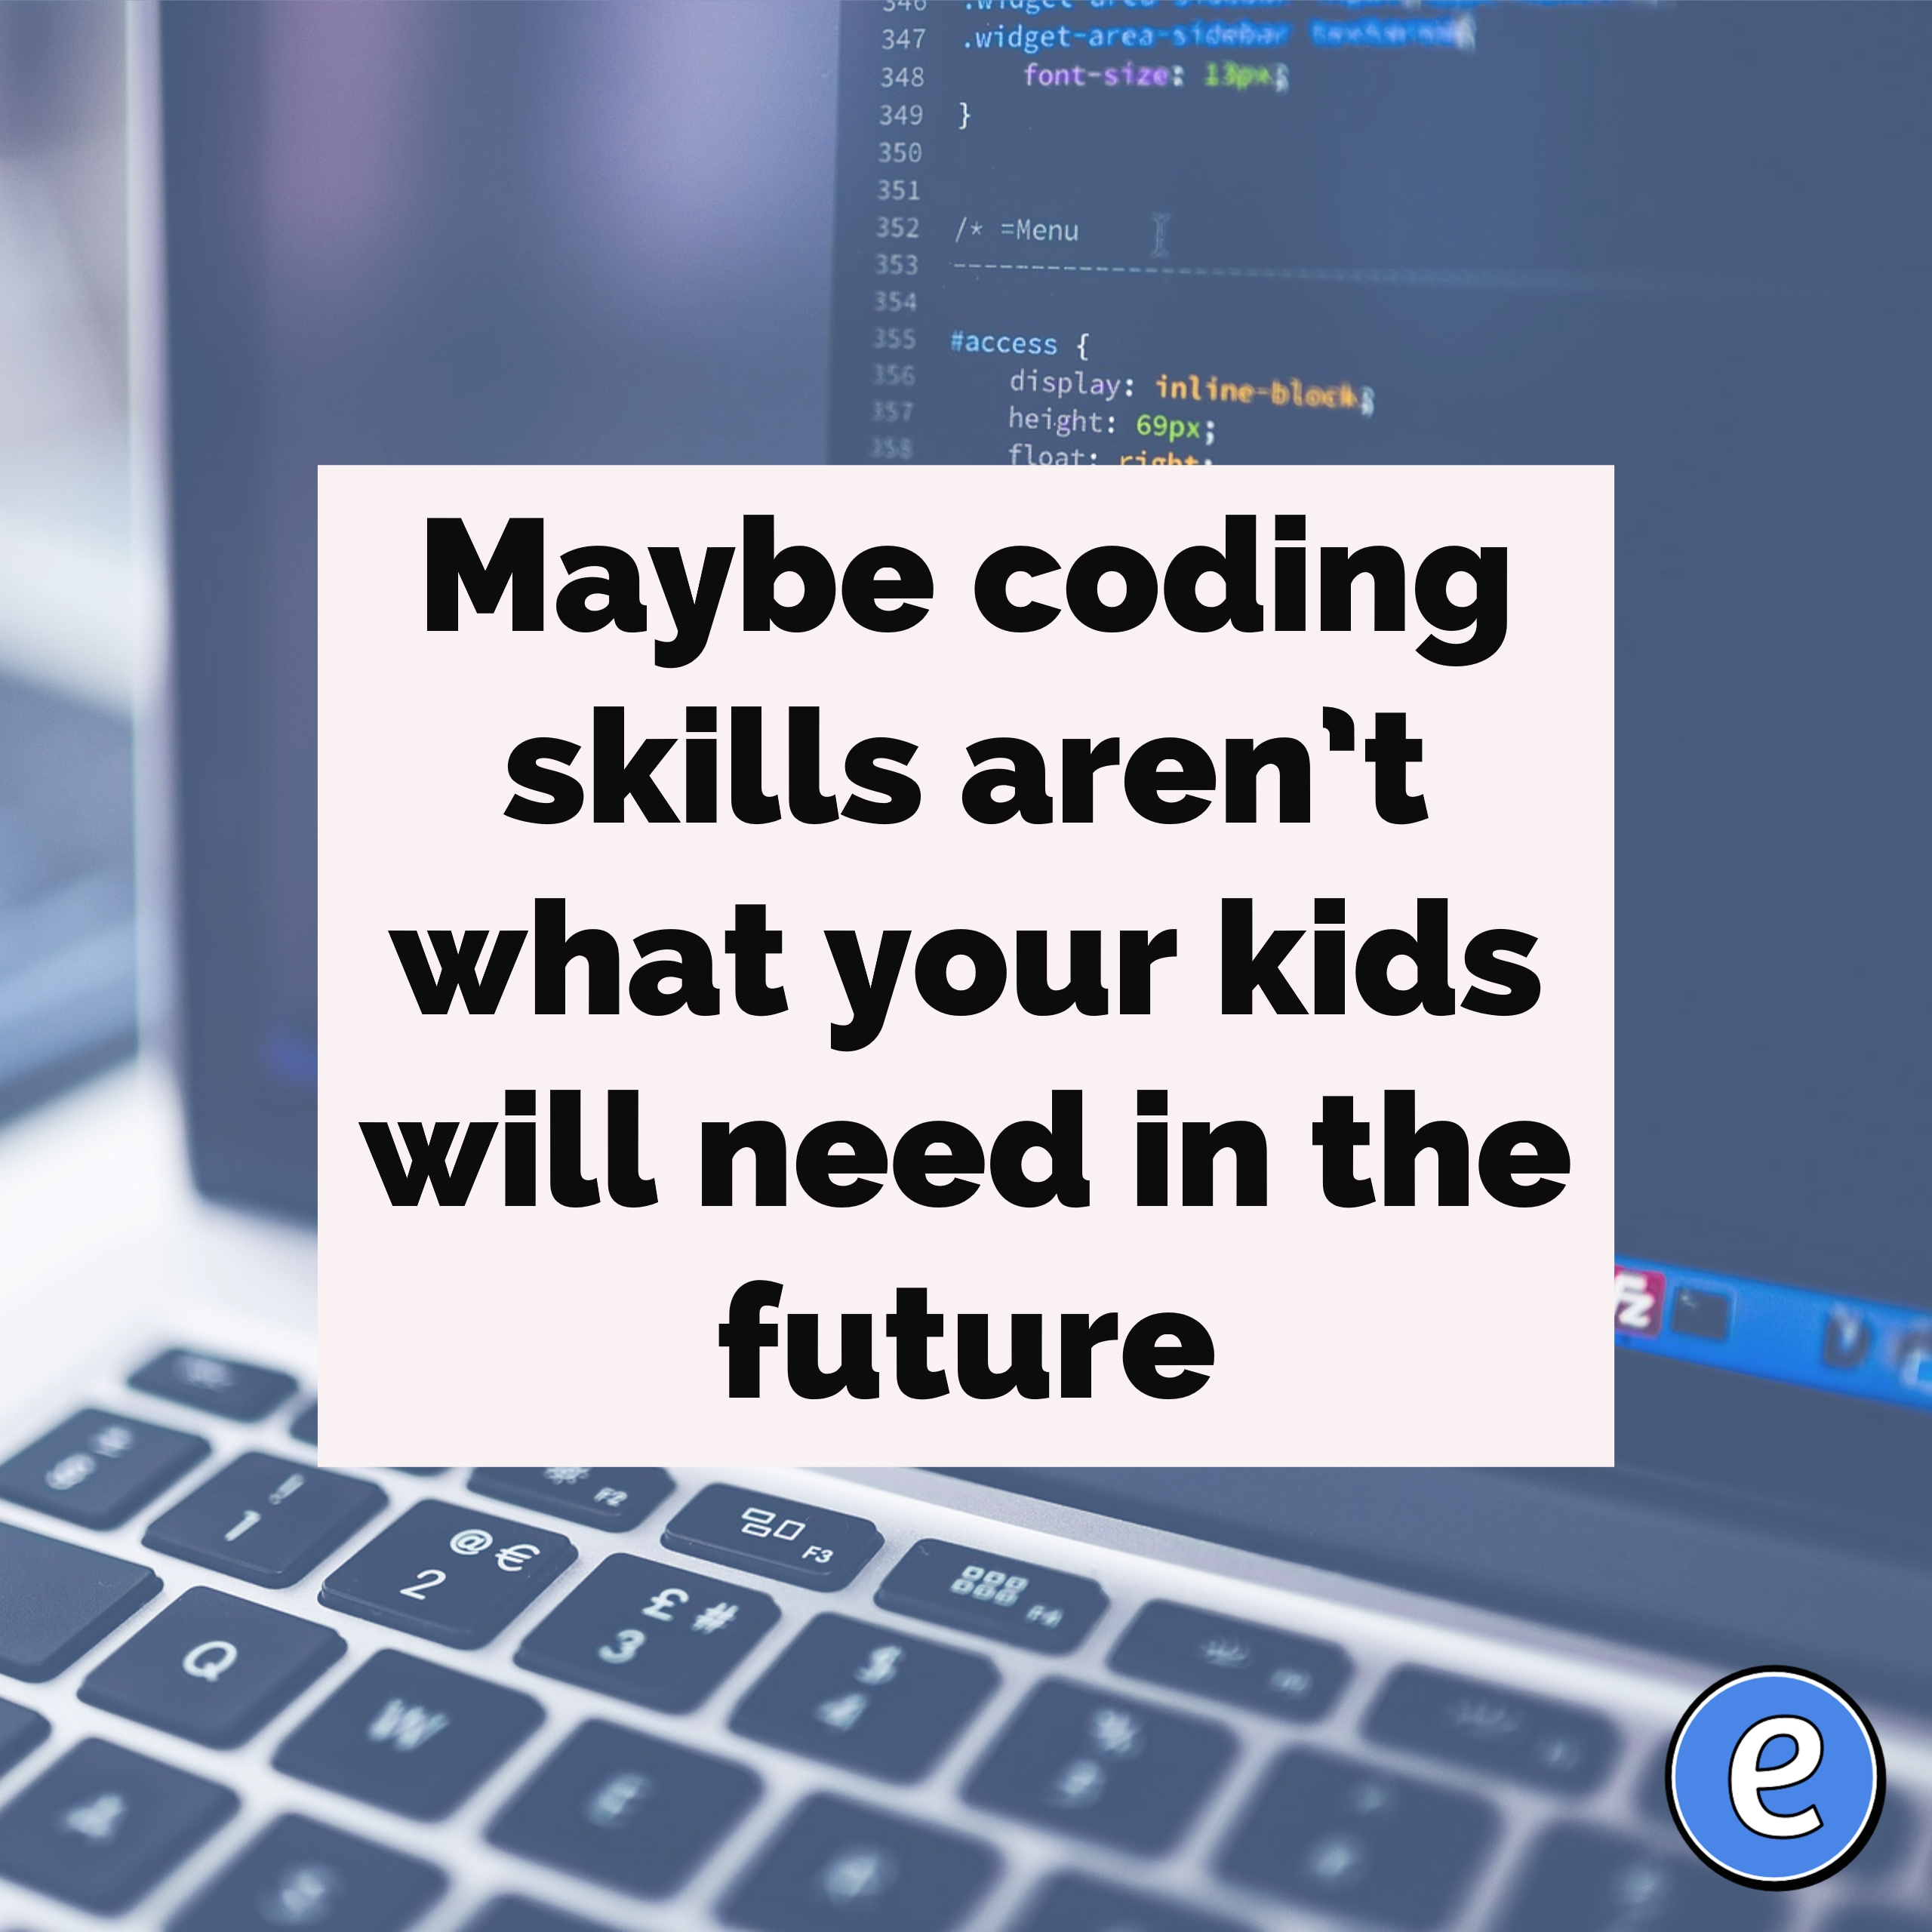 Maybe coding skills aren’t what your kids will need in the future